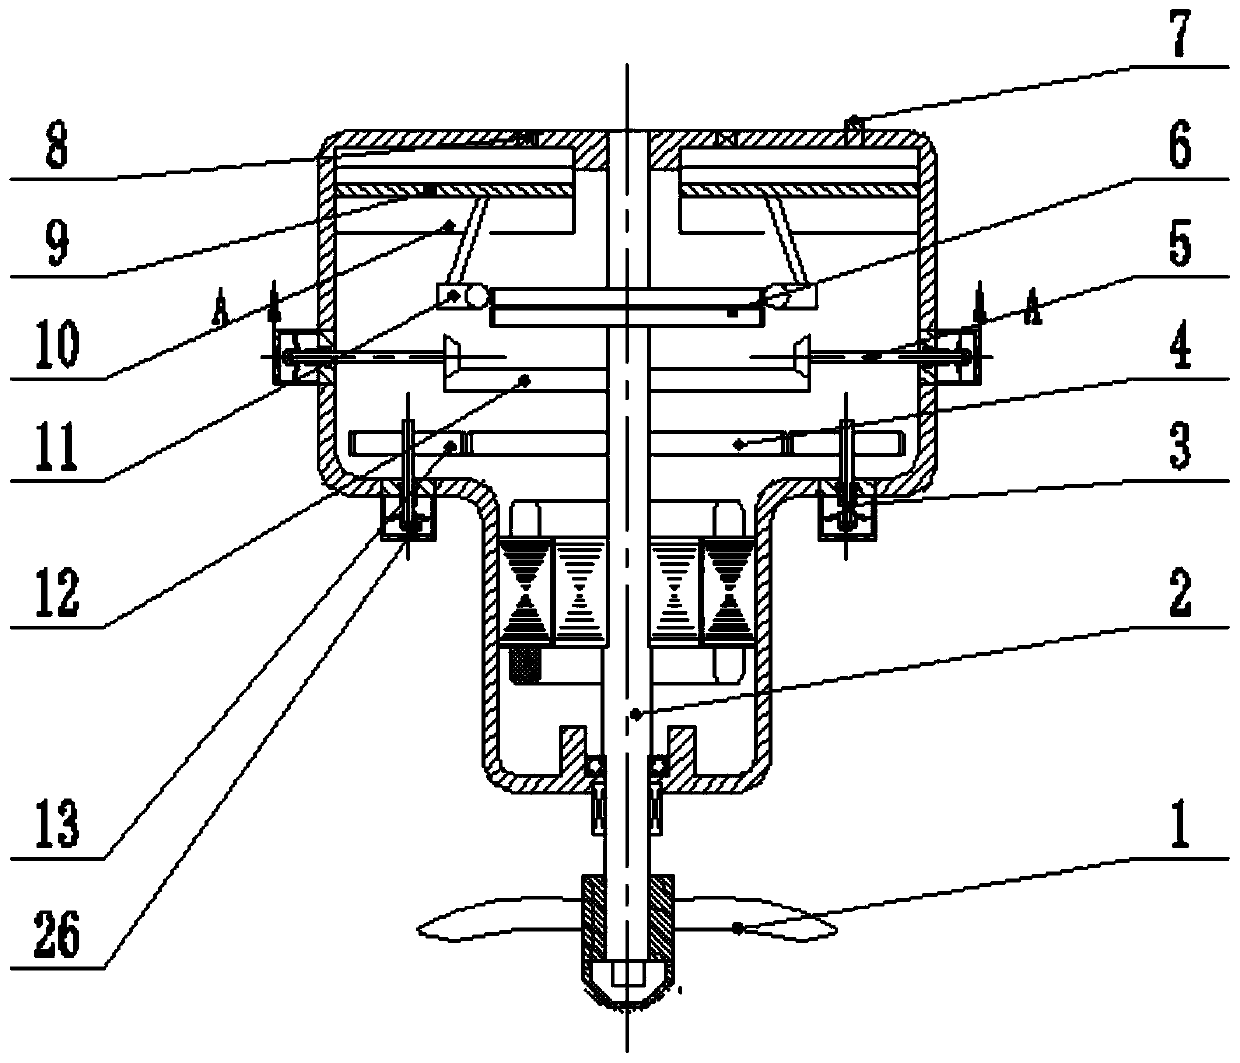 An automatic floating and sinking submersible mixer